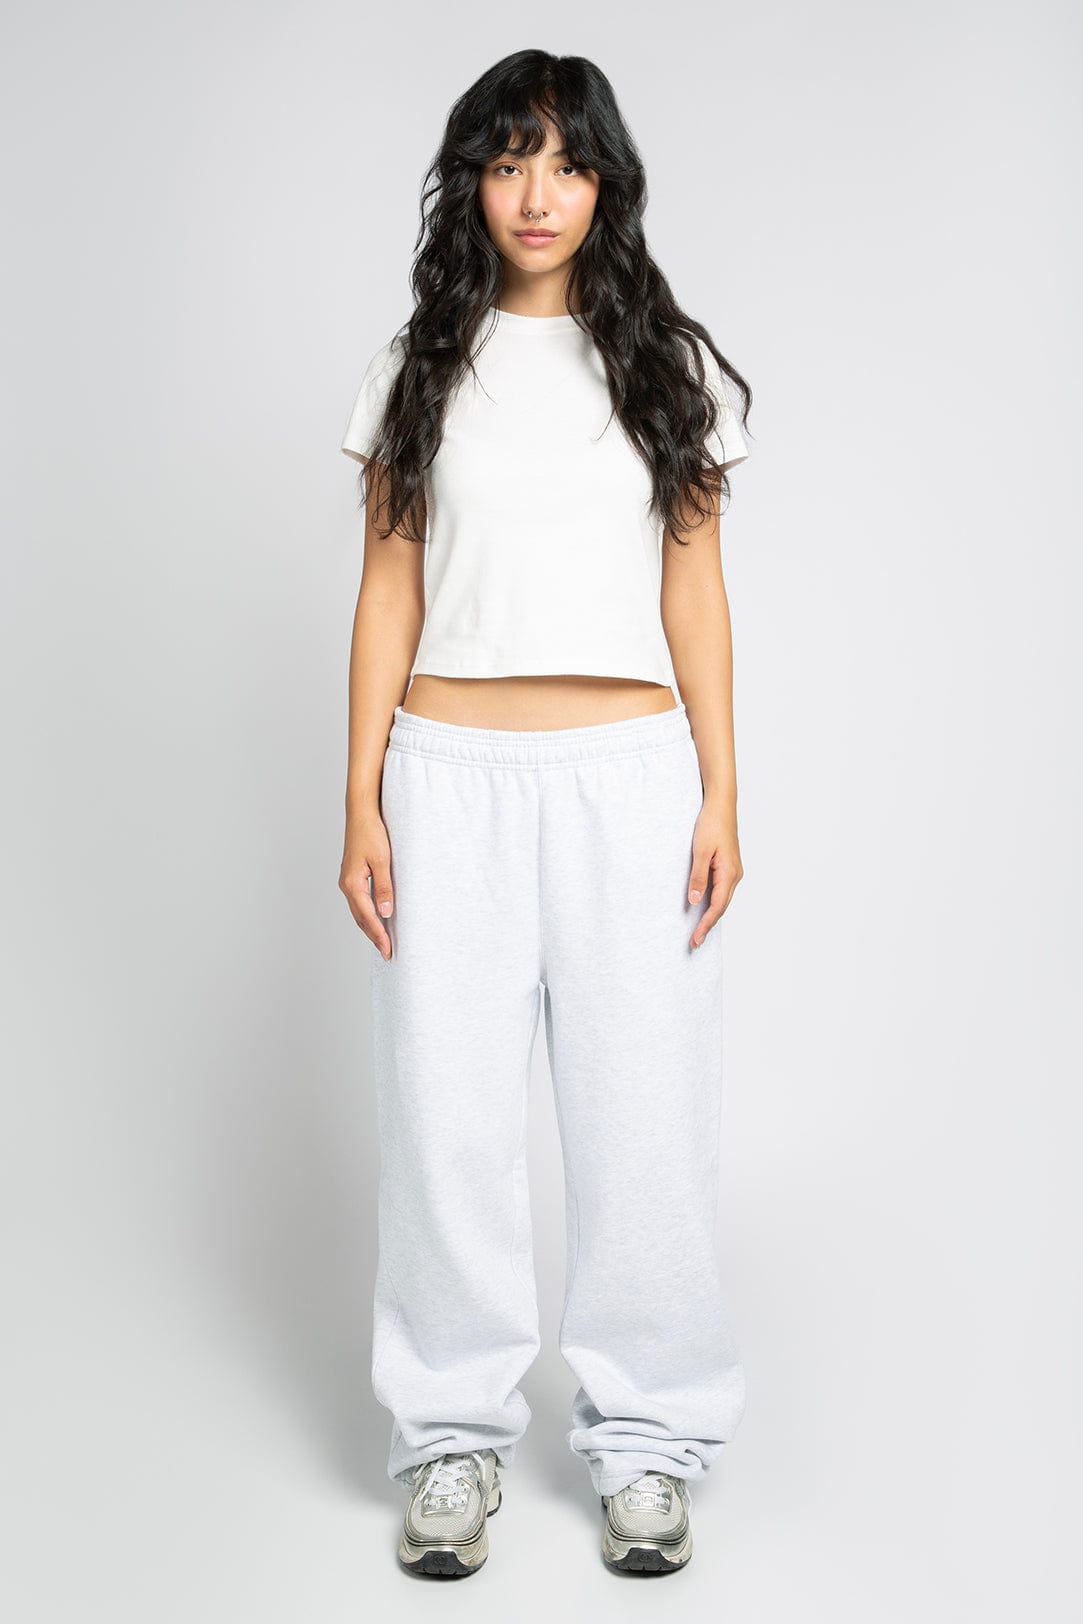 SWEATS COLLECTION - WOMEN